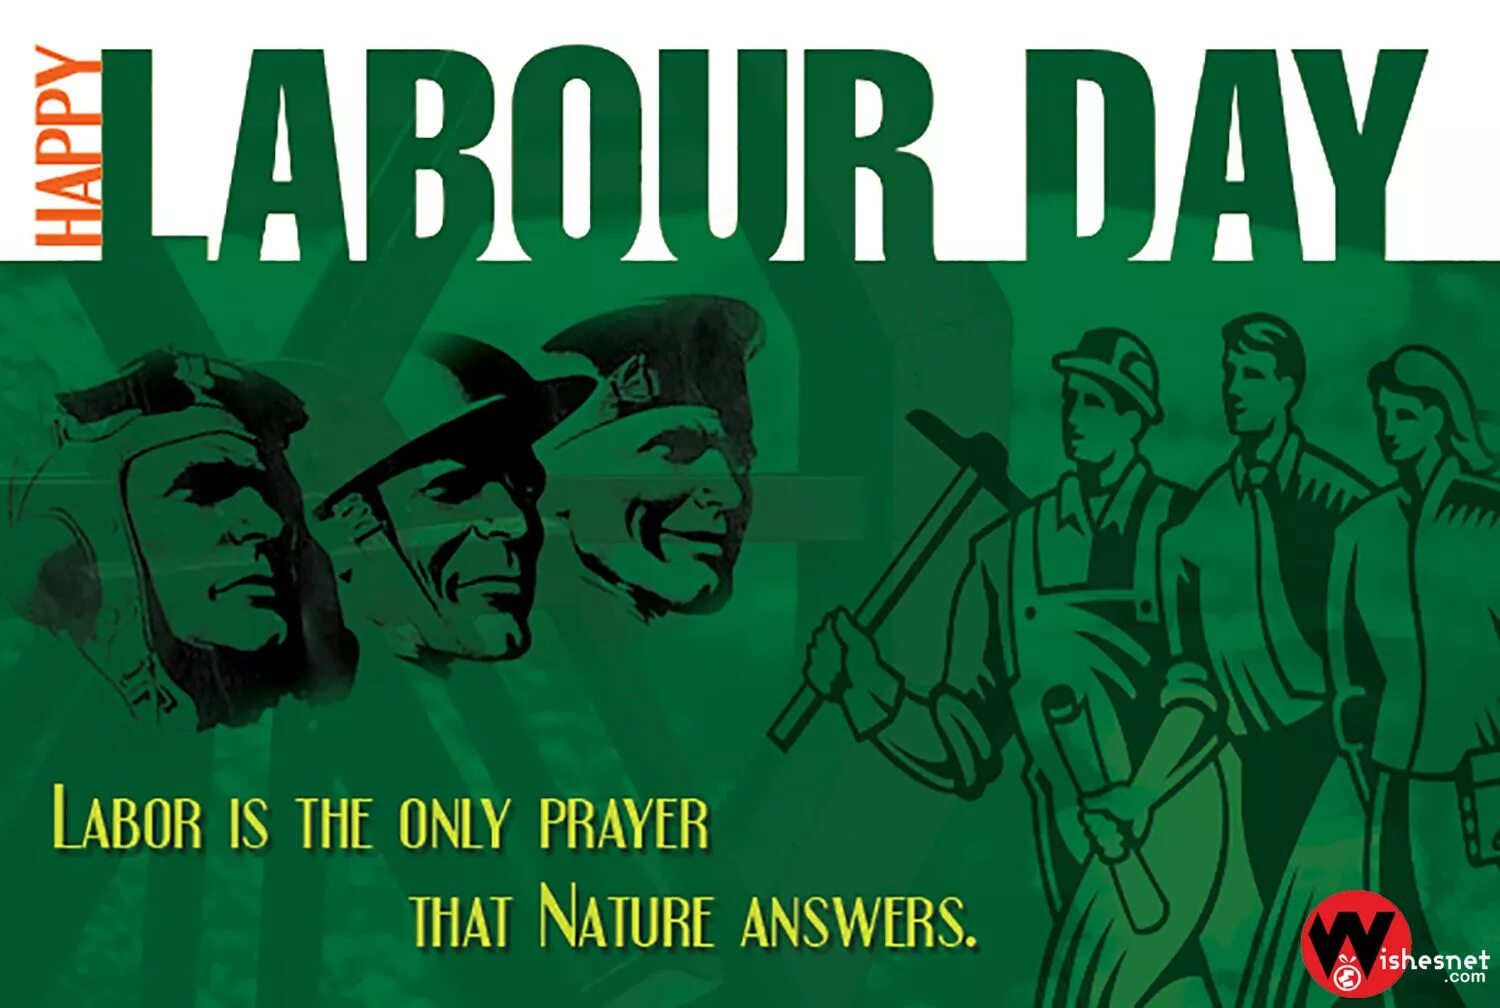 Made may day. Labour Day. День труда в США. Happy Labor Day 1 May. International Labour Day 1 May.